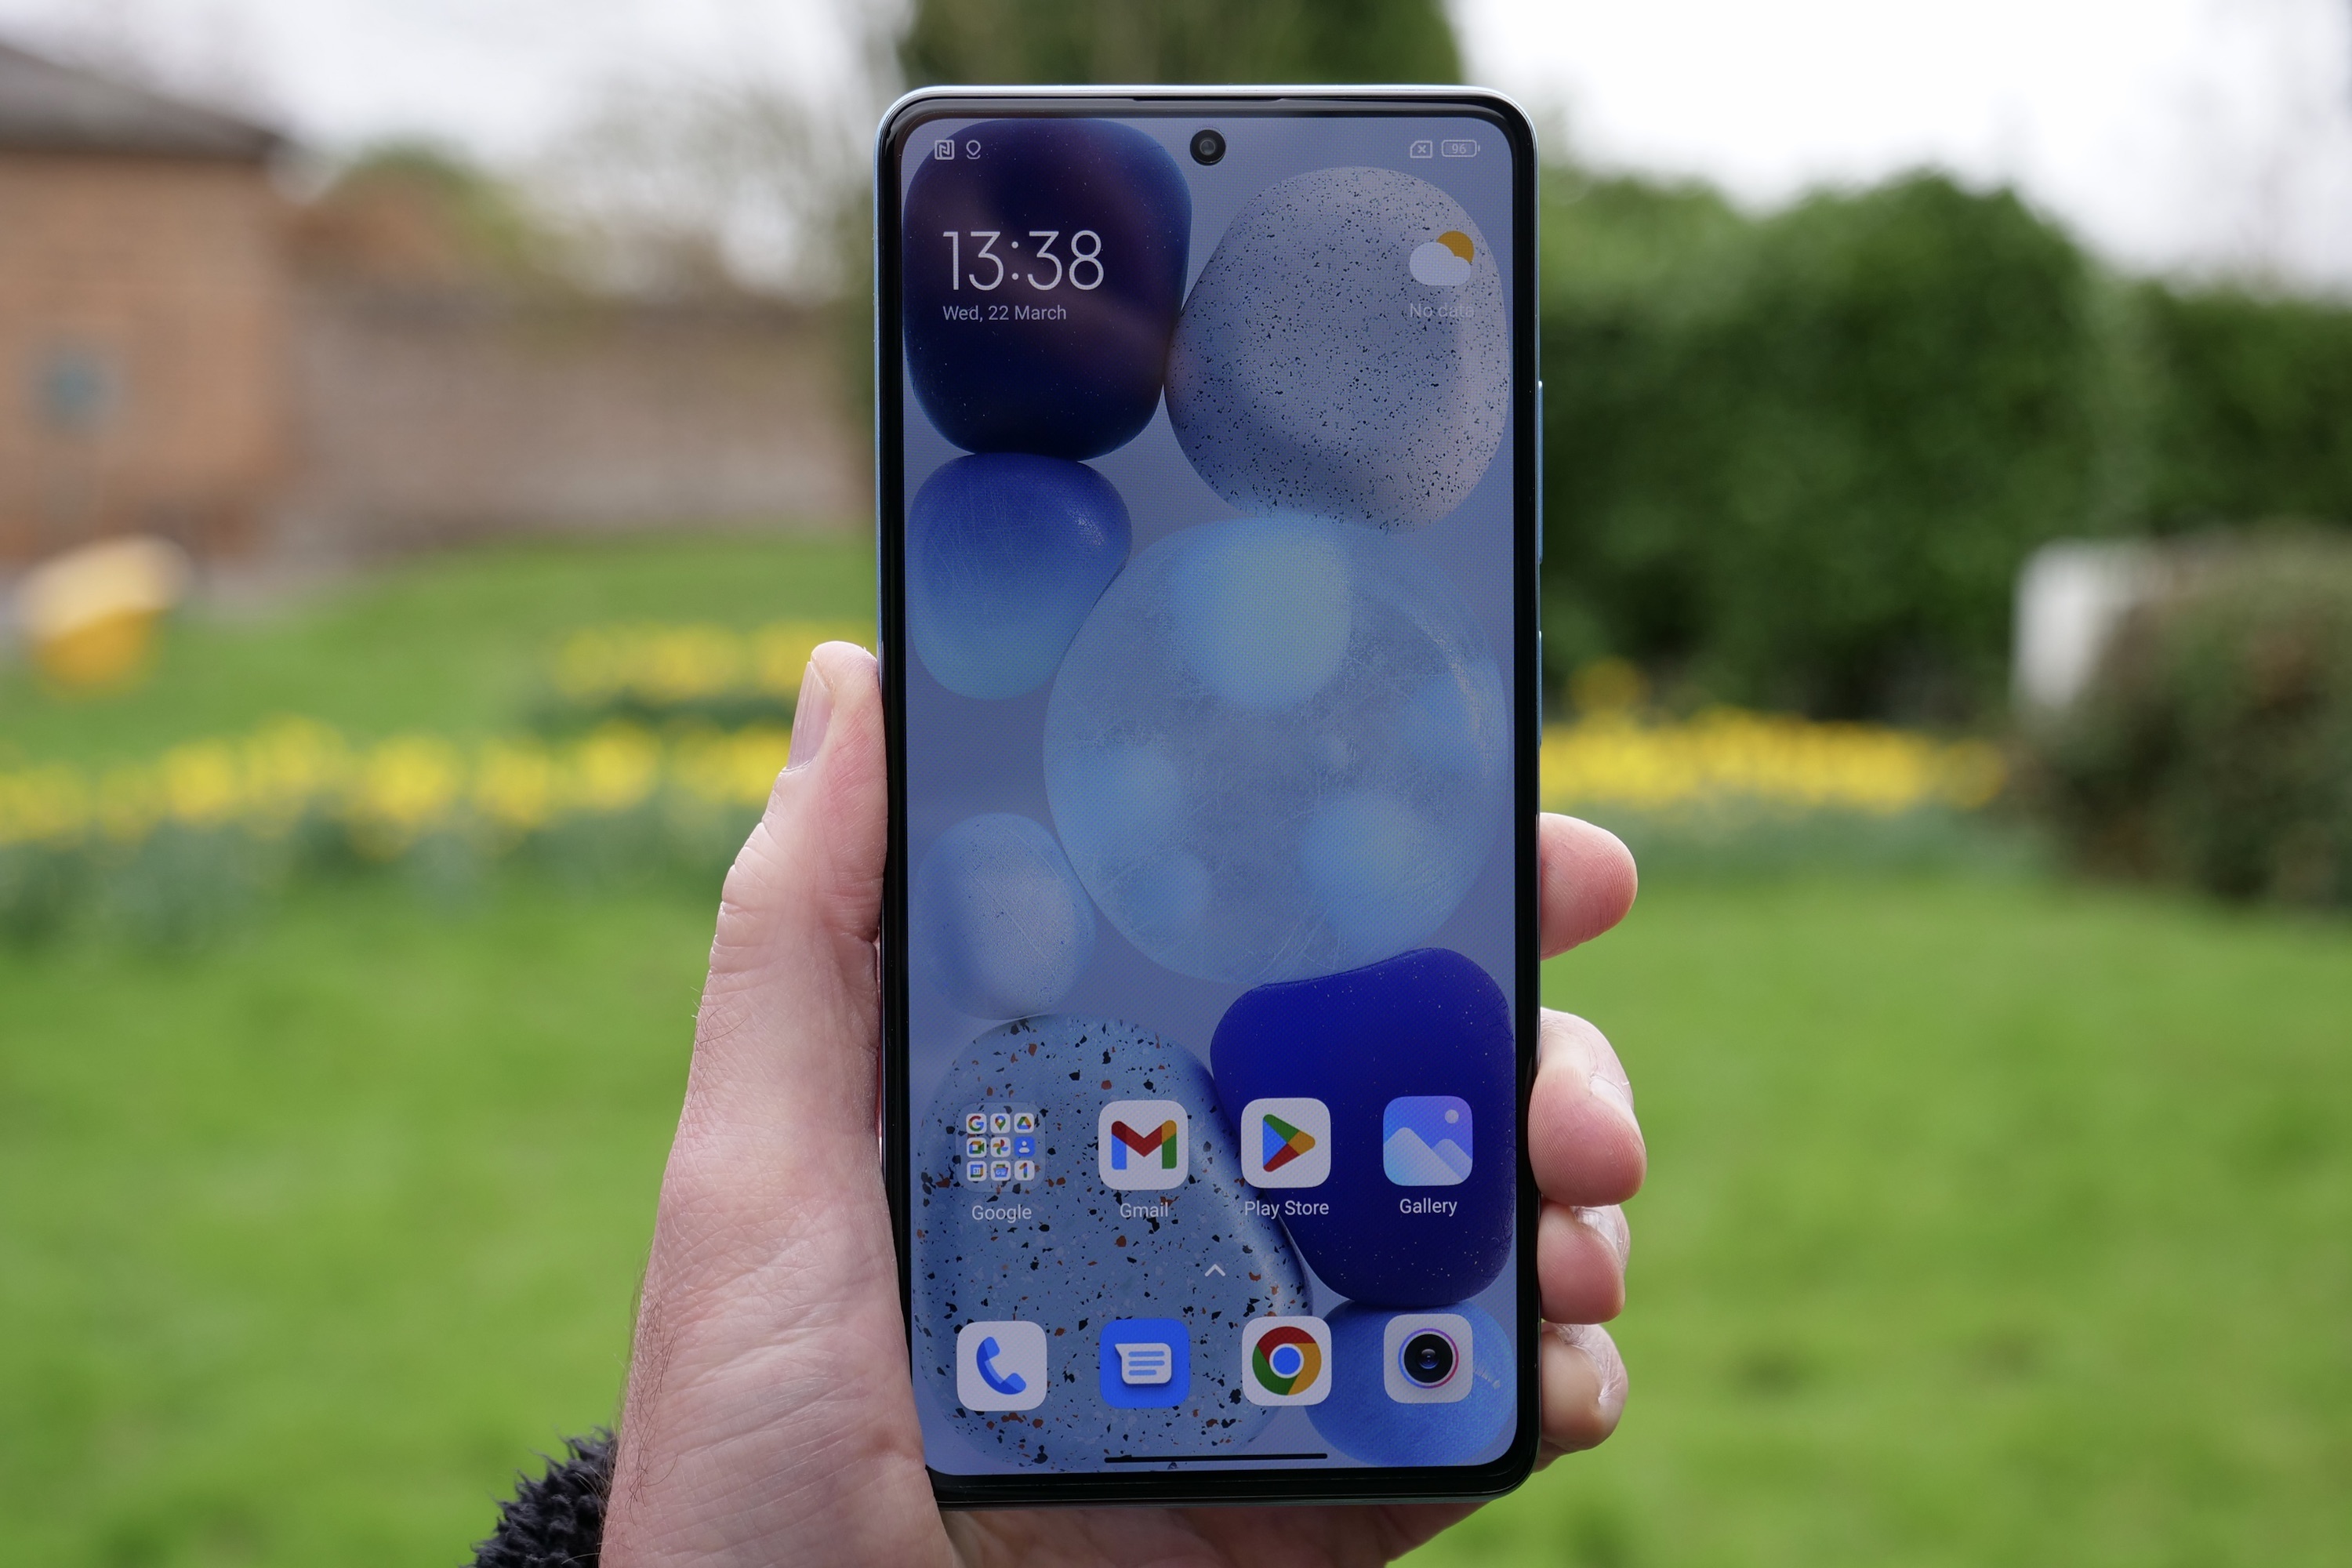 Redmi Note 13 Pro Plus Full Review: A good looking phone is a good